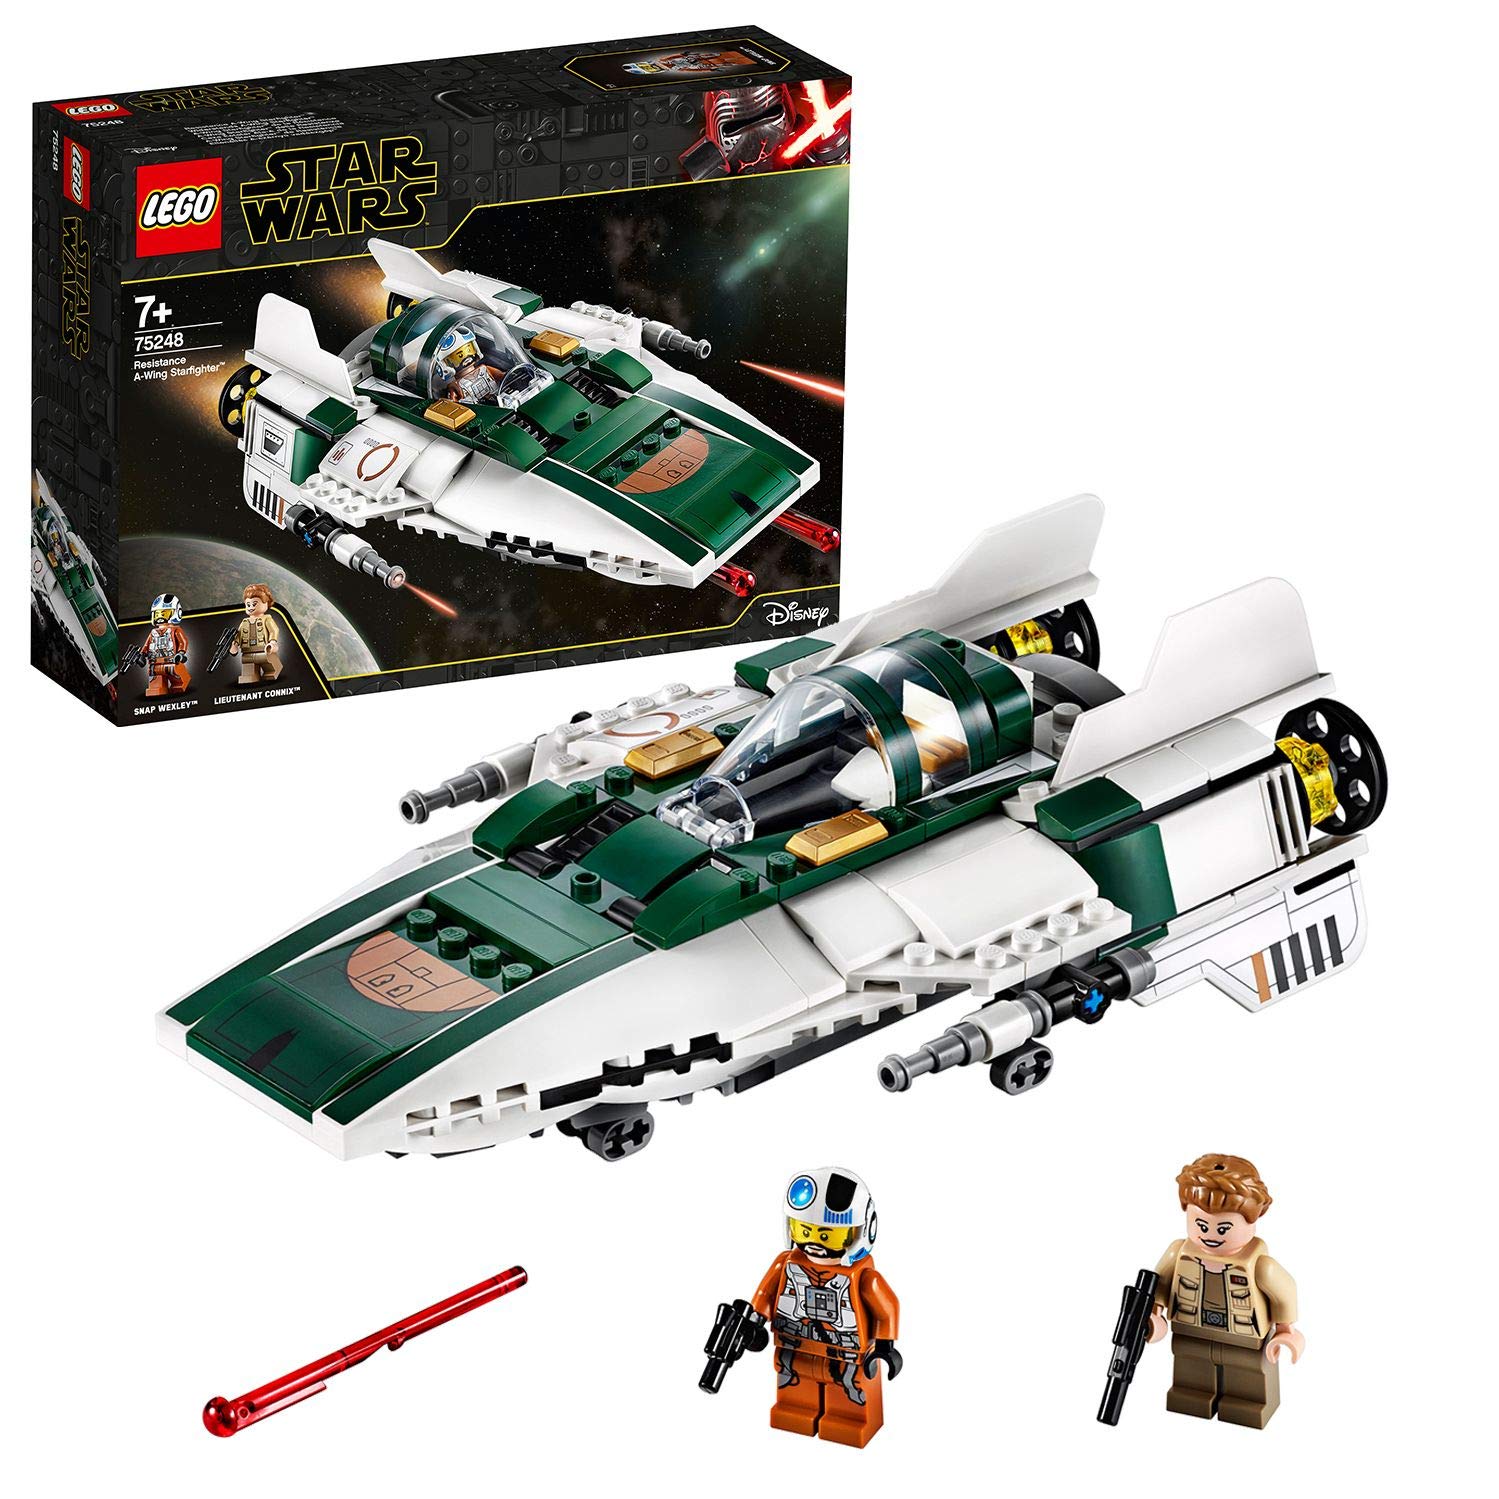 Lego Star Wars 75248 Conf_Gv_Ep9 V29 Product Title Missing Submission, Mult